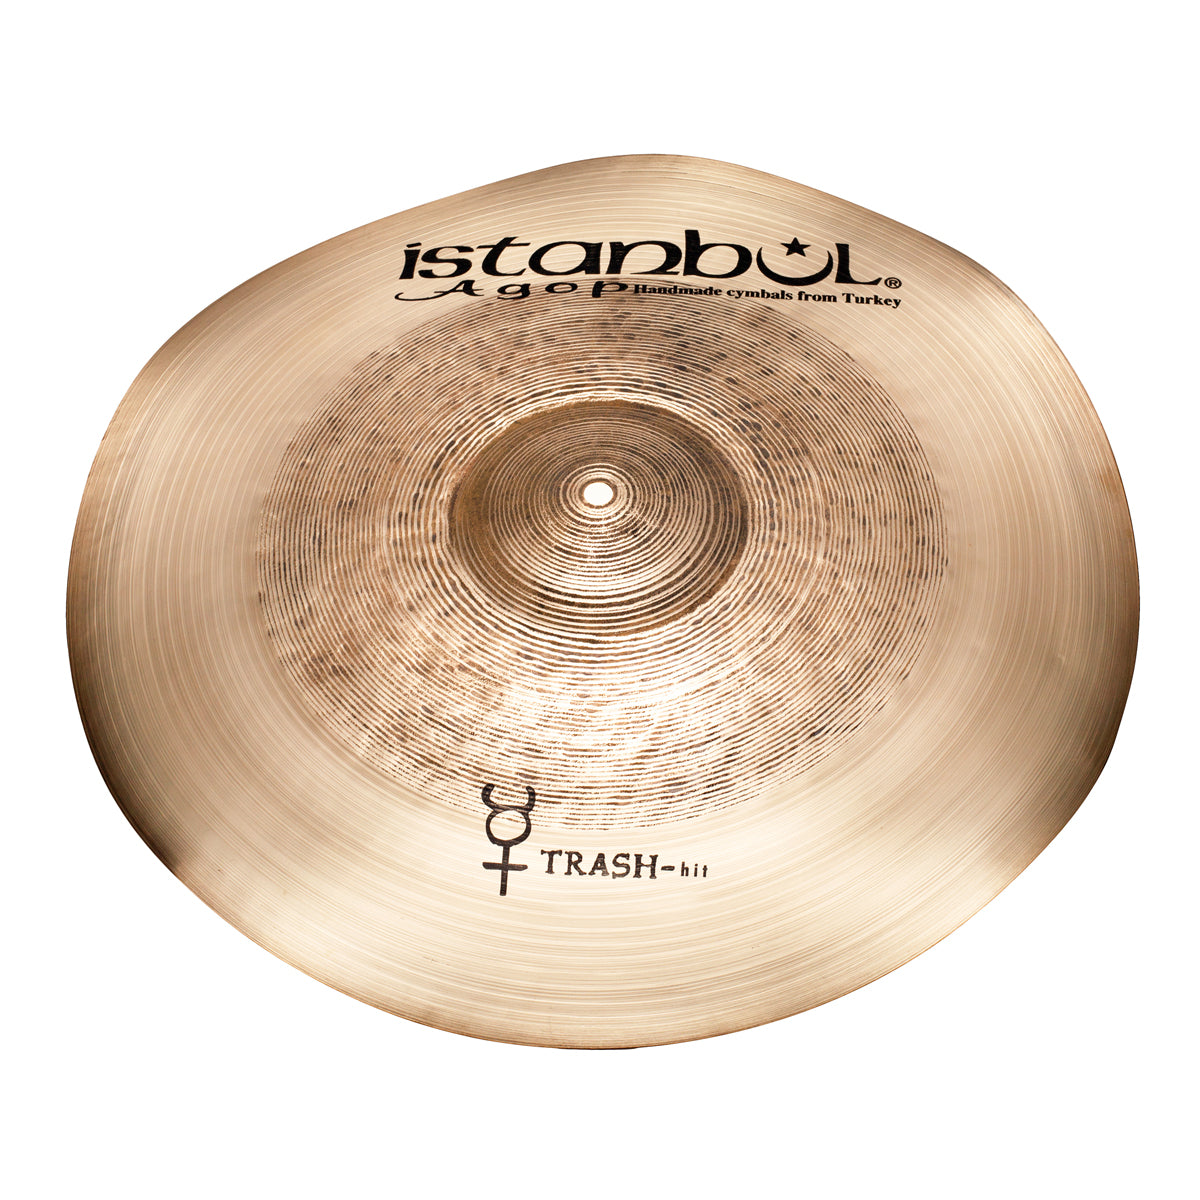 Istanbul Agop Traditional 14" Trash Hit